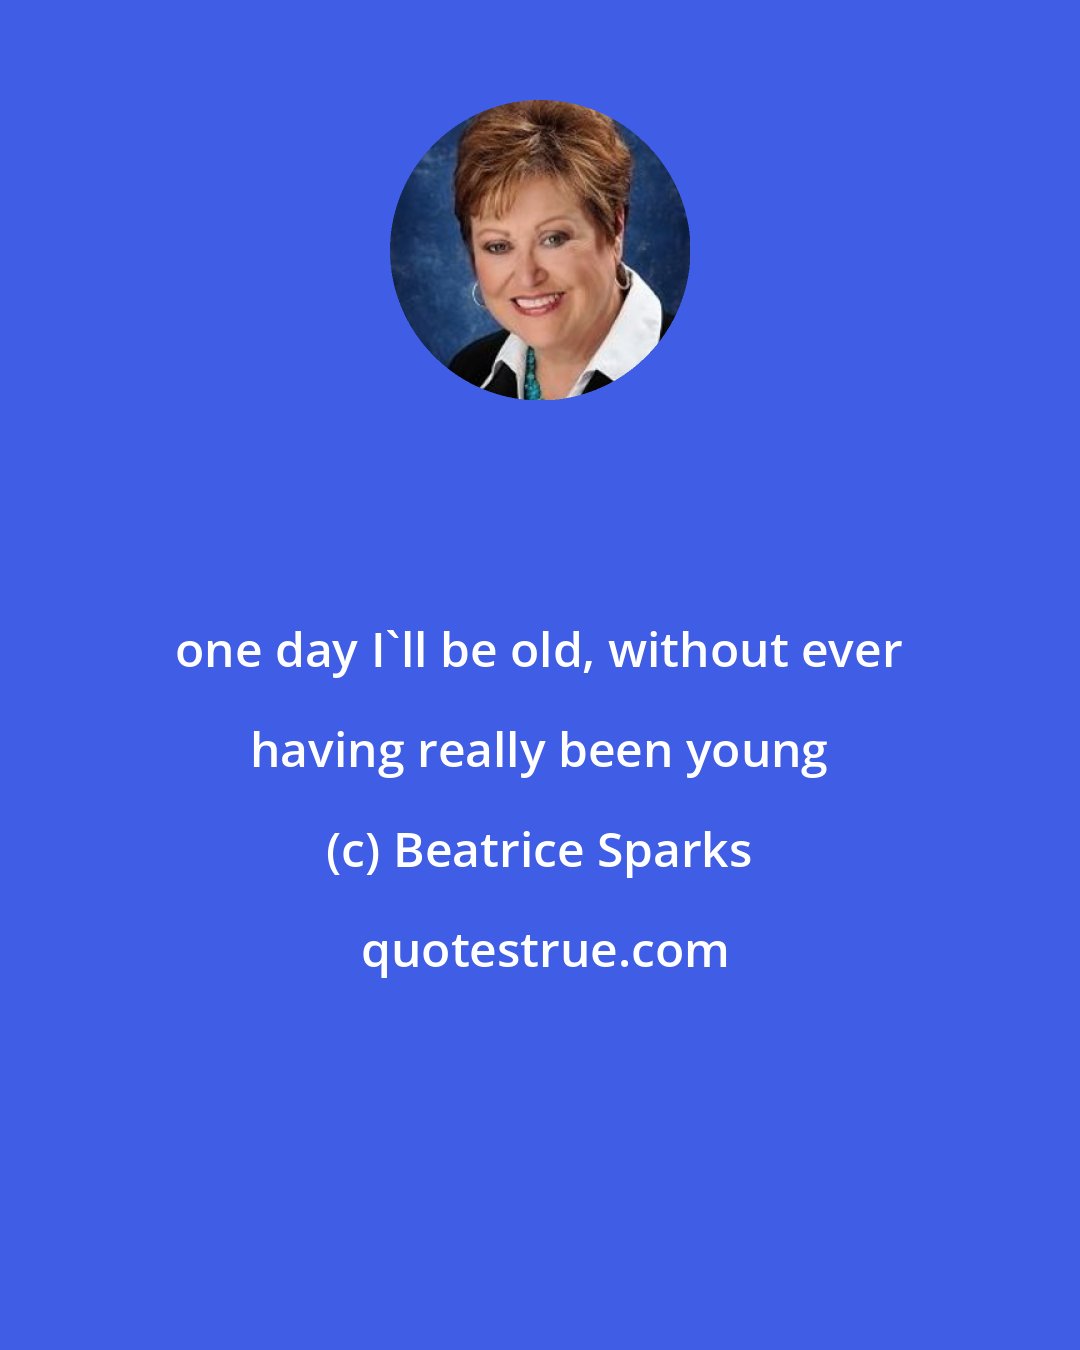 Beatrice Sparks: one day I'll be old, without ever having really been young